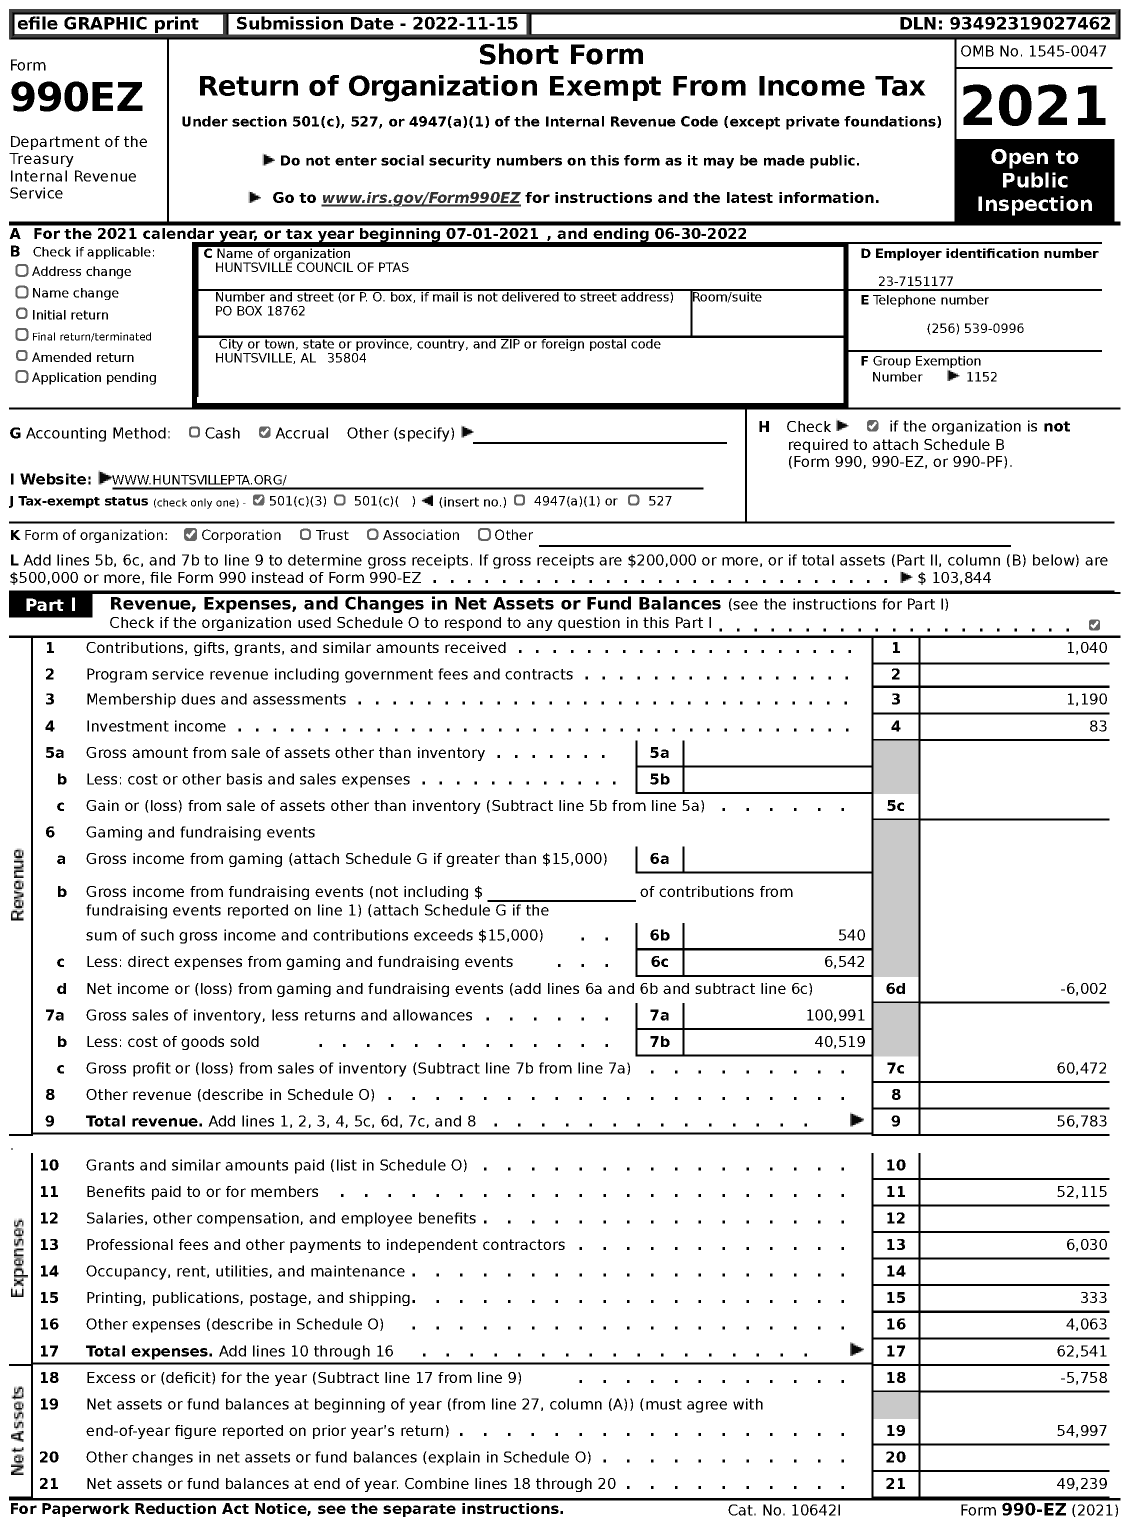 Image of first page of 2021 Form 990EZ for Huntsville Council of Ptas